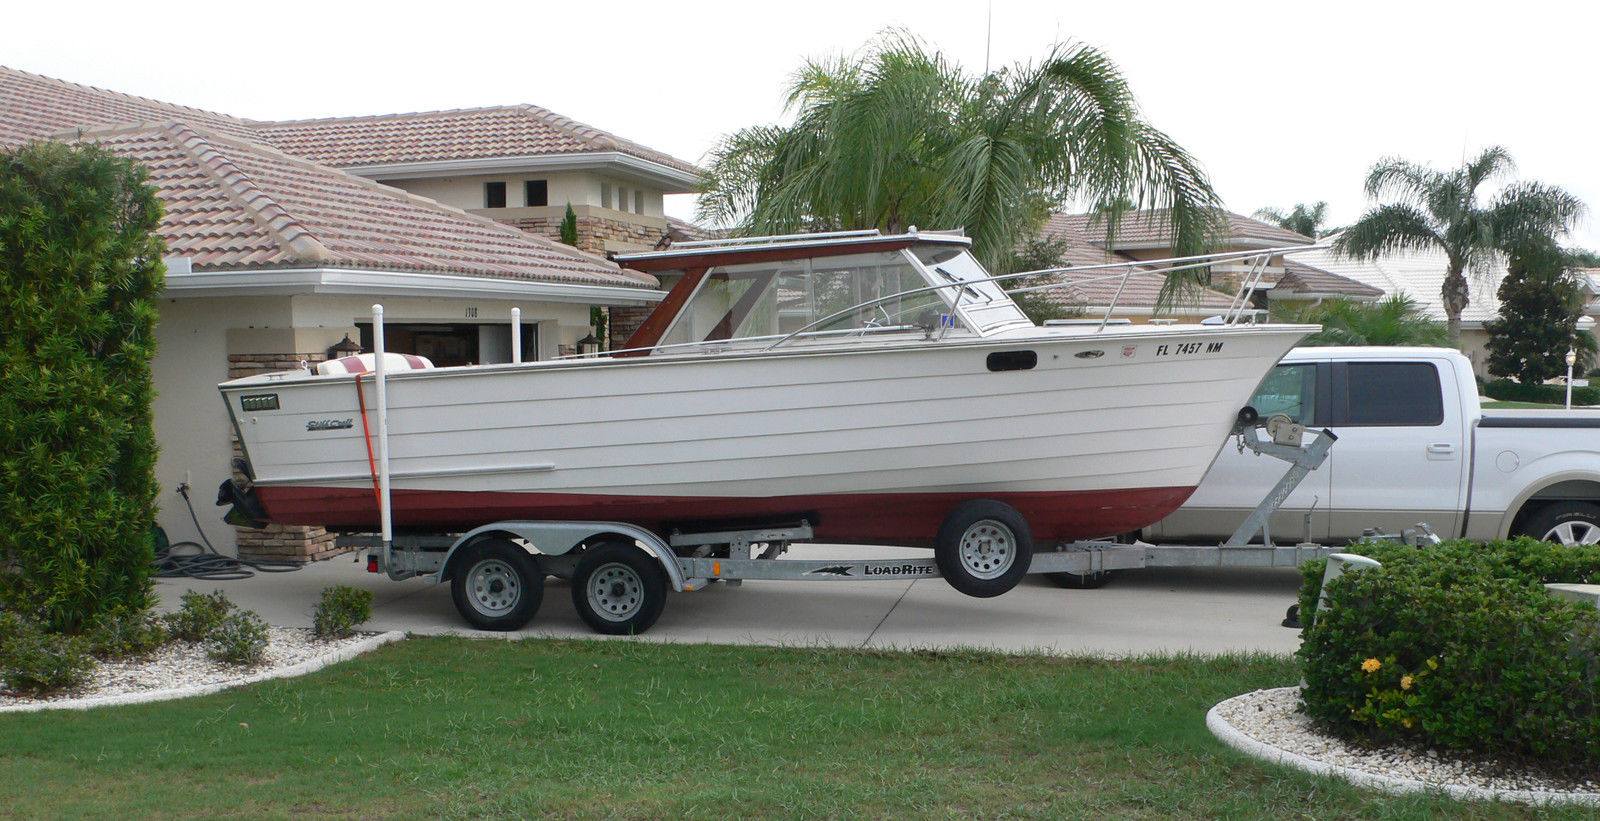 Skiff Craft X240 boat for sale from USA